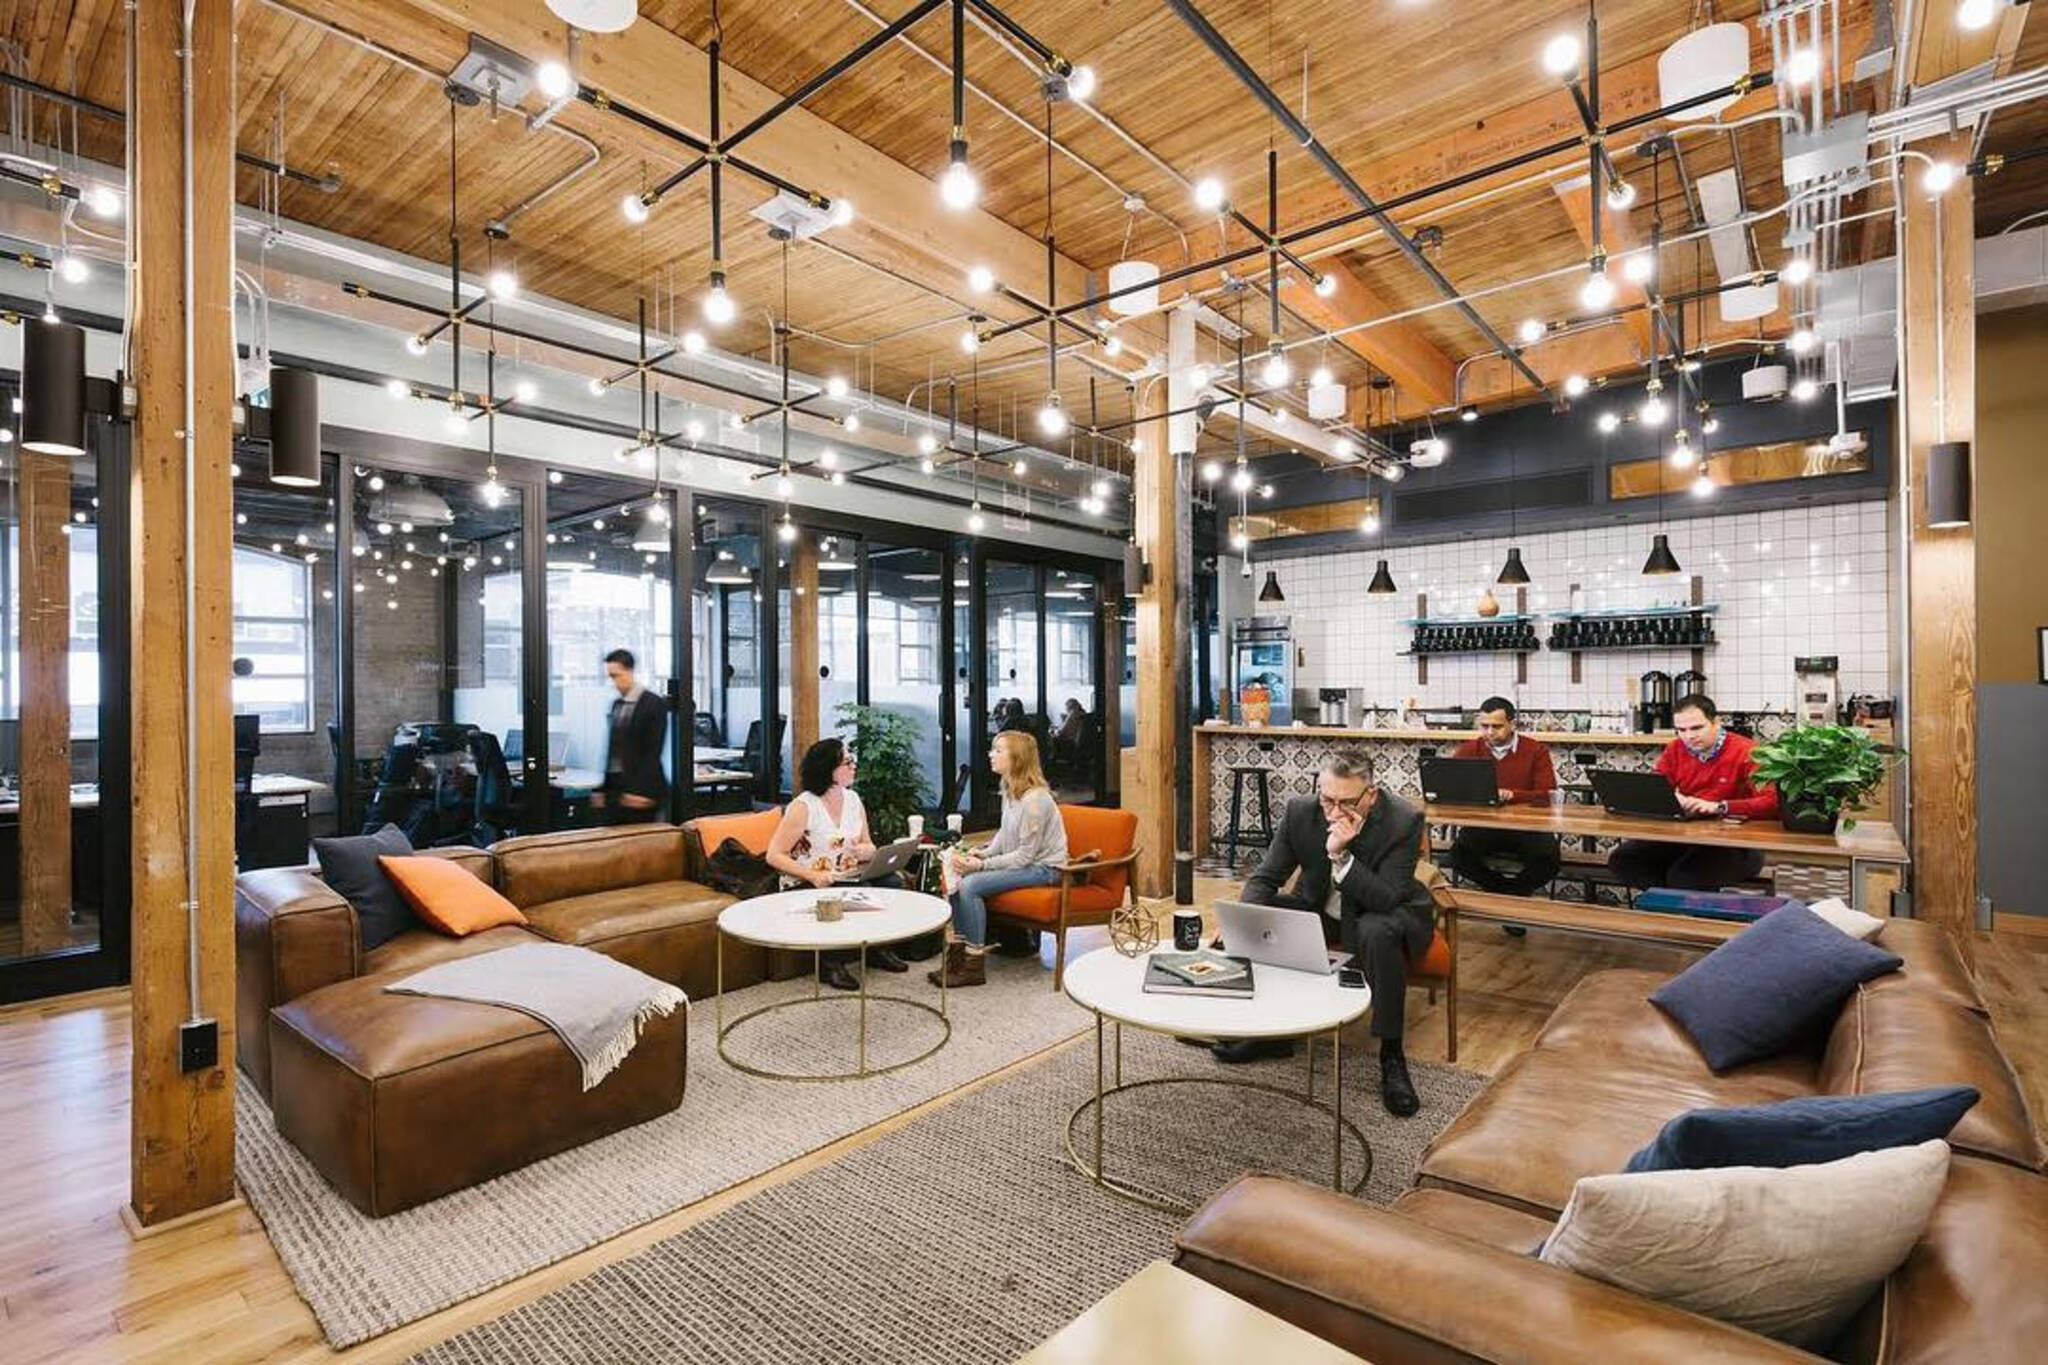 Co-working company WeWork plans 20 more locations in Toronto